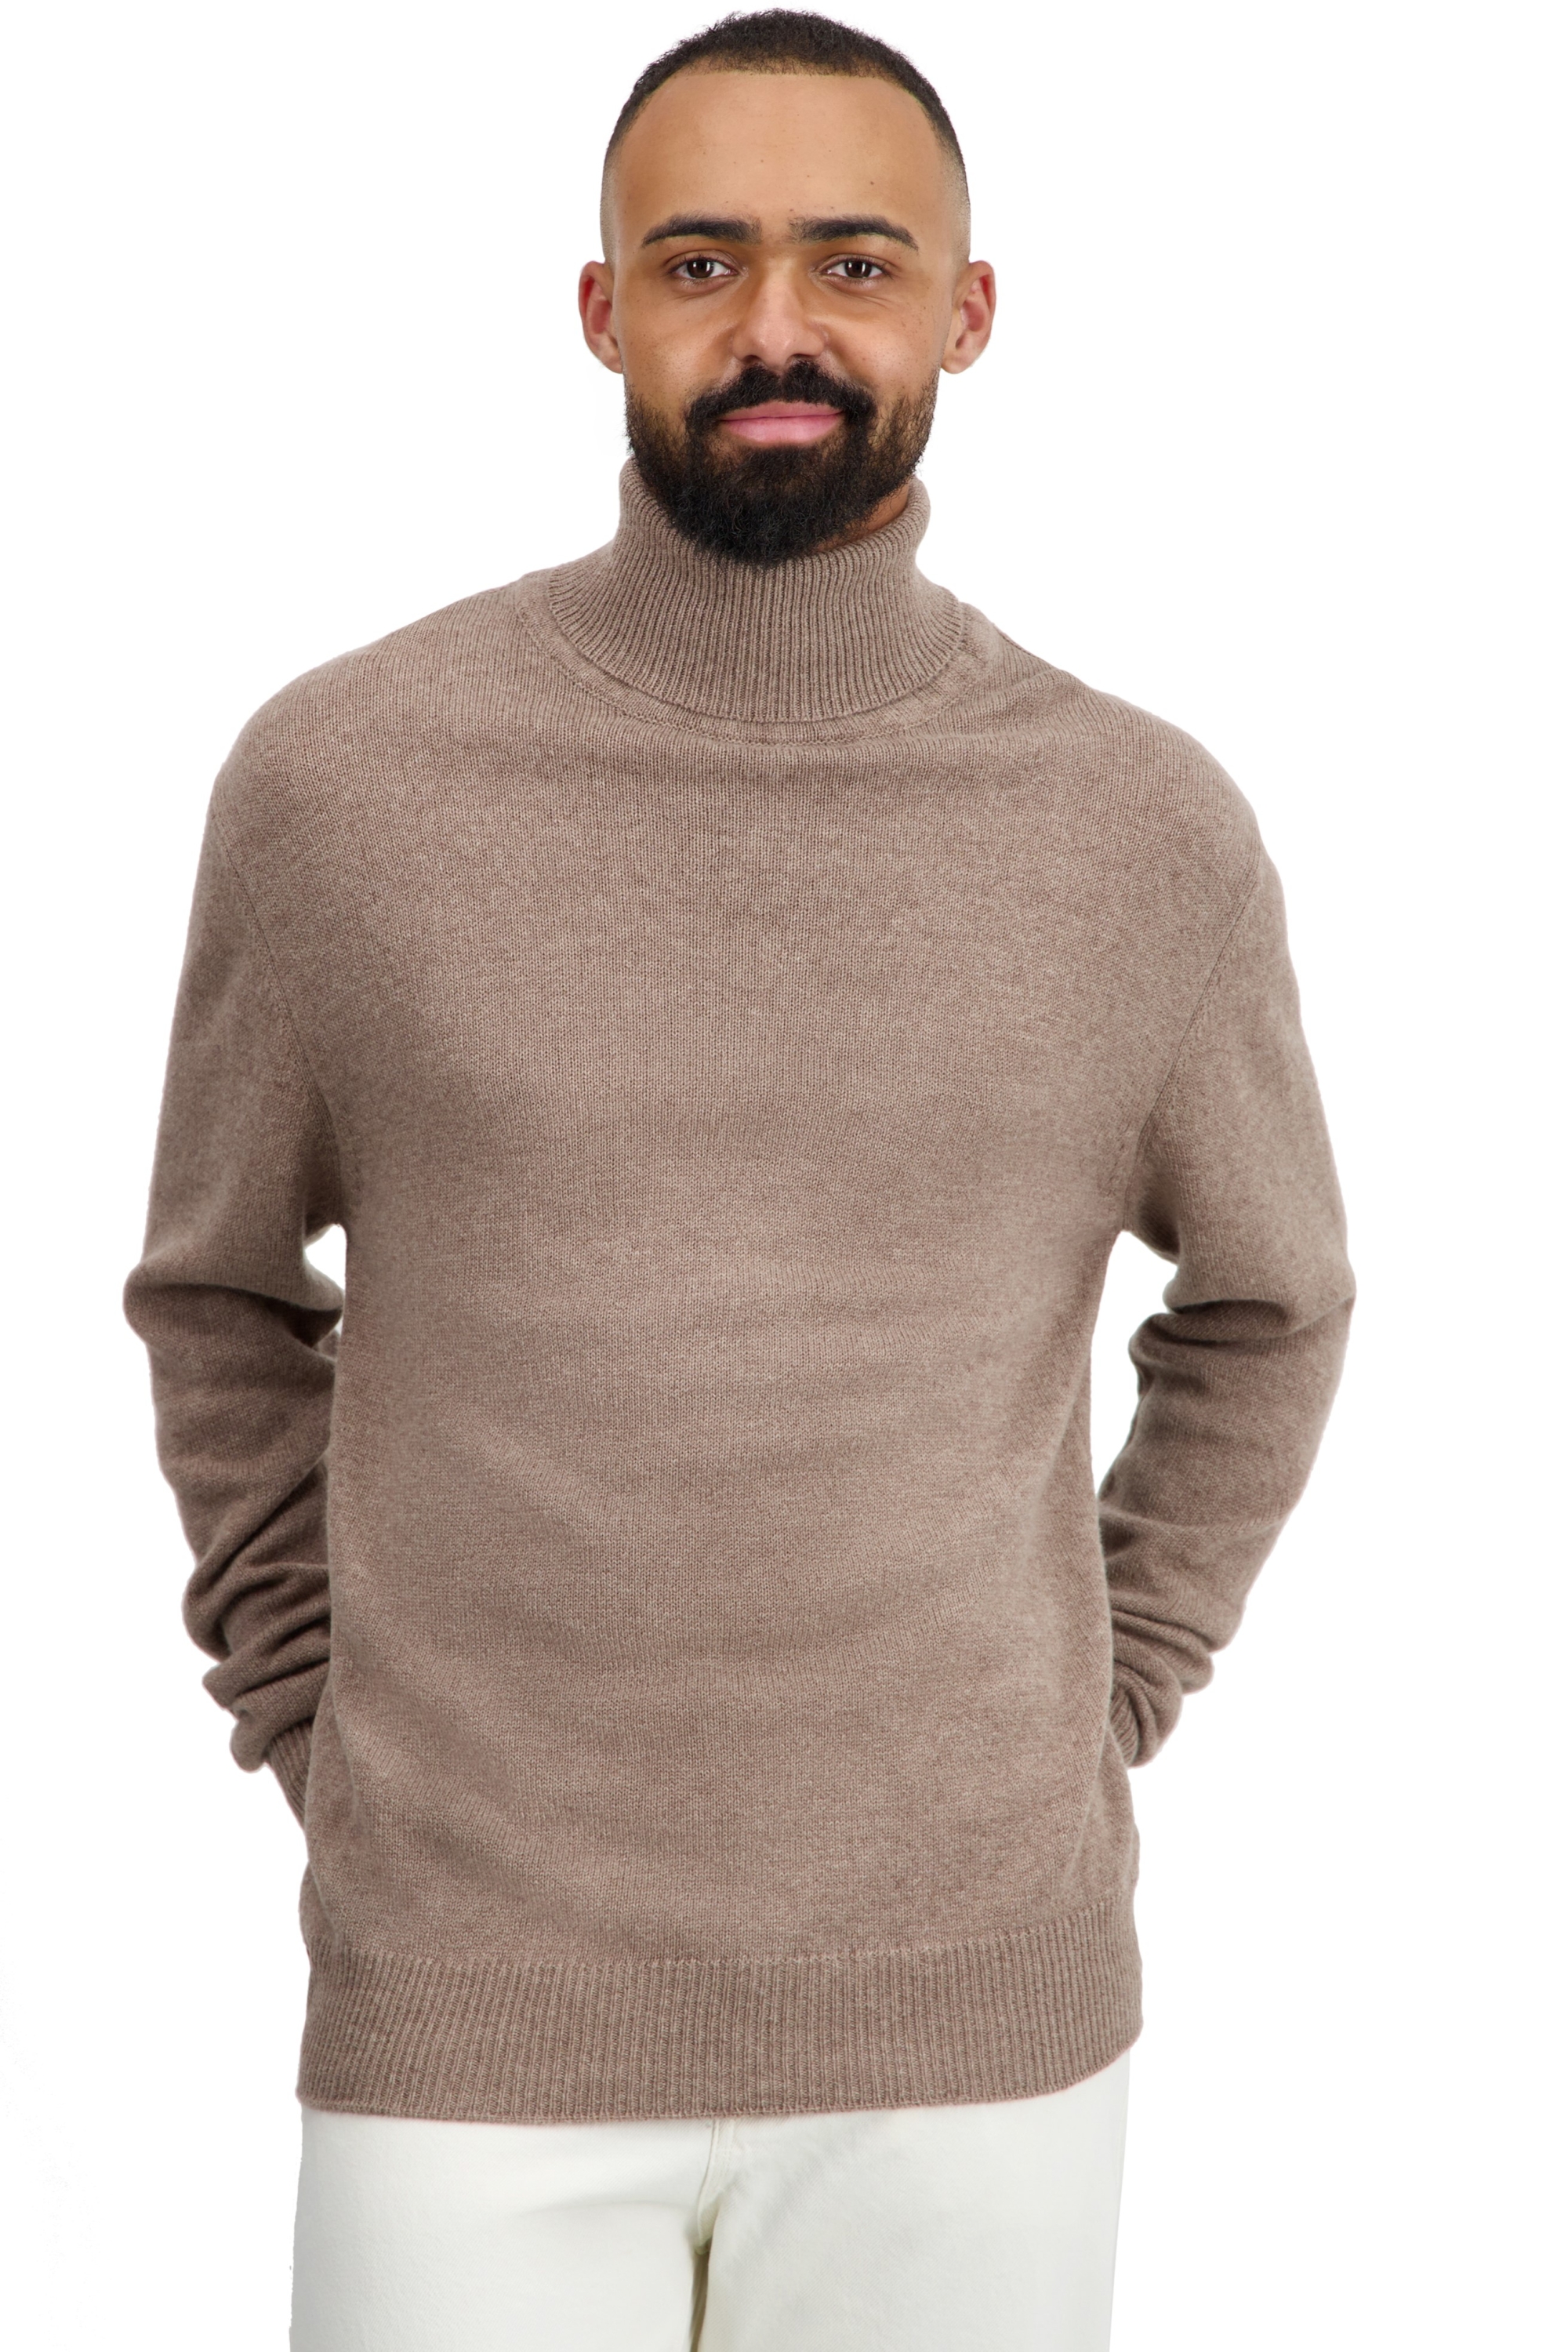 Cachemire pull homme col roule edgar 4f natural terra xs